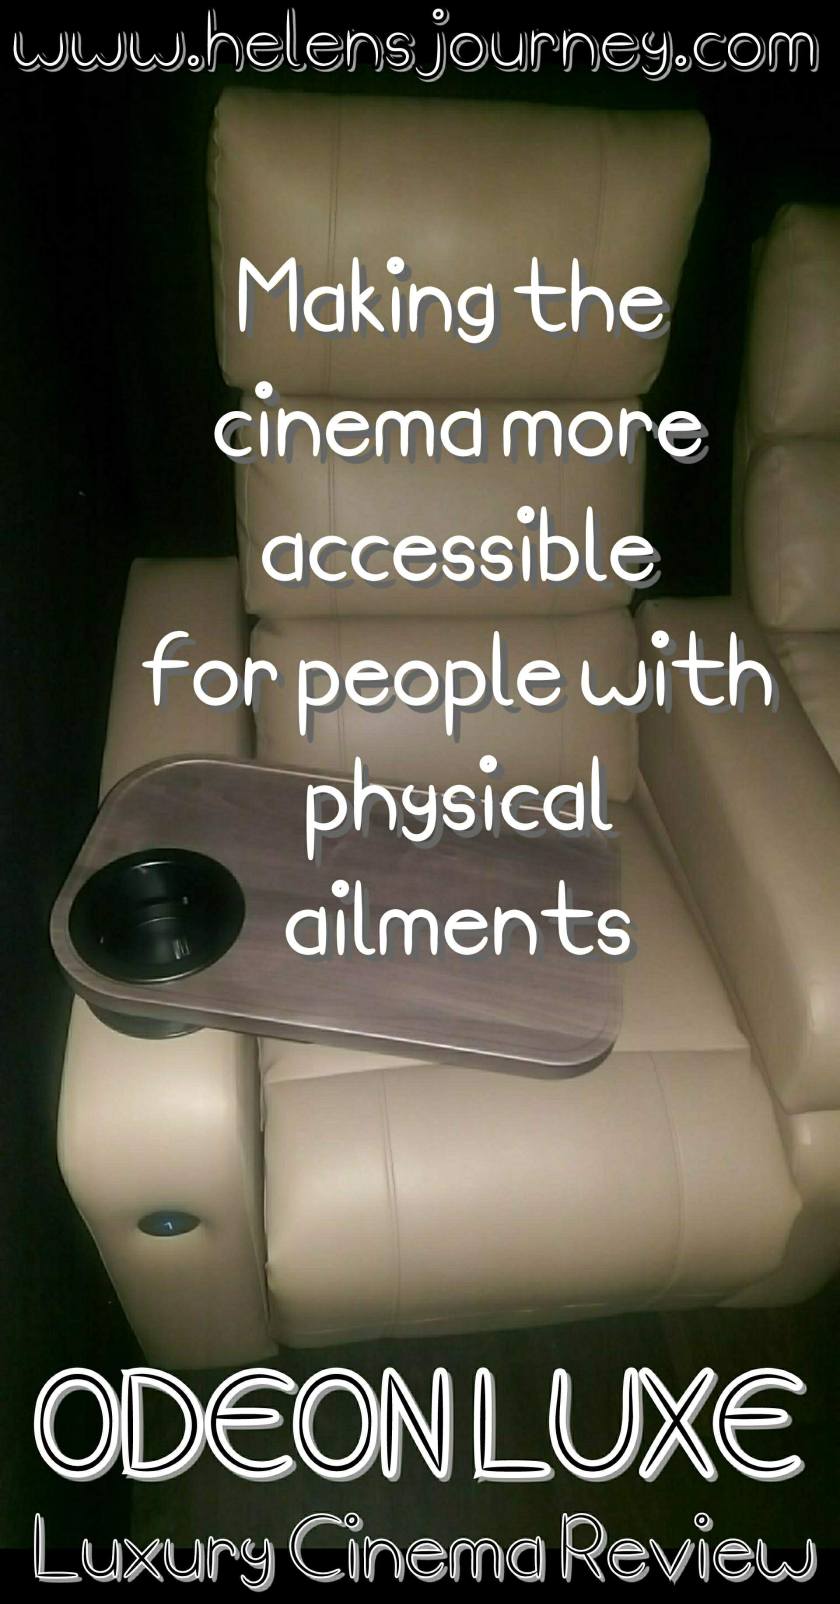 making films more accessible for people with physical ailments. review of odeon luxe, luxury cinema by Helen's Journey Blog www.helensjourney.com